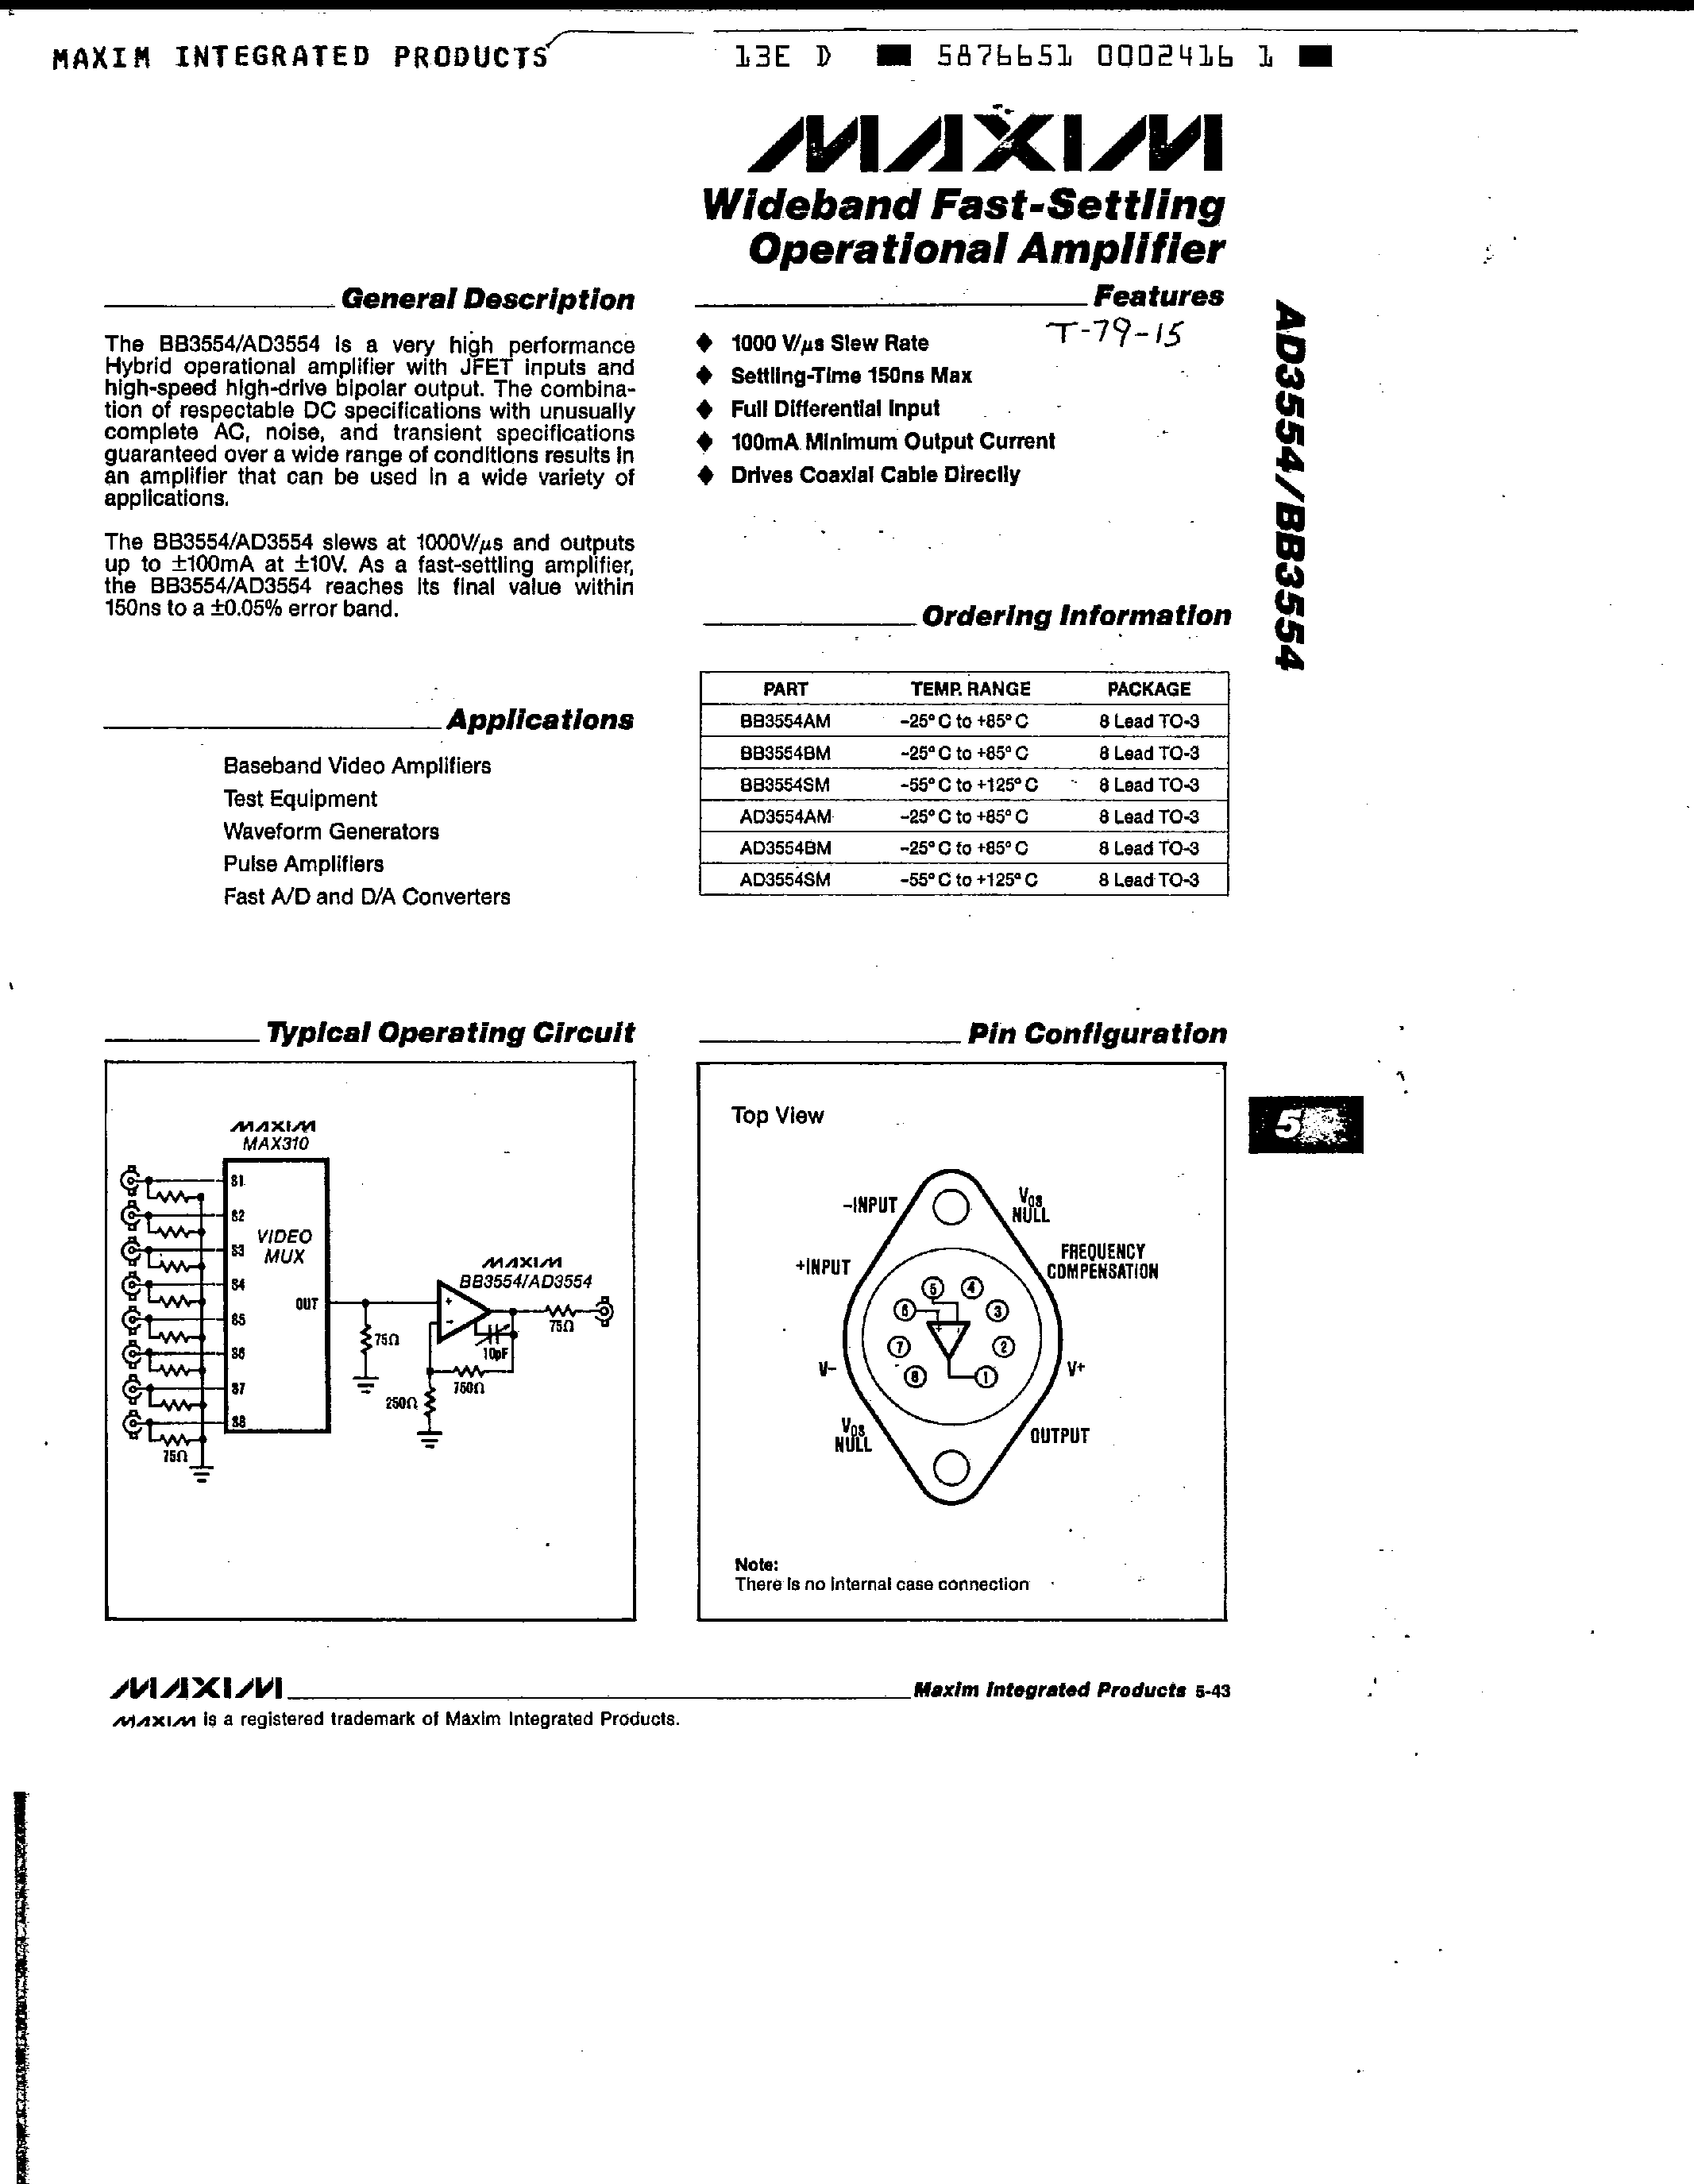 Datasheet AD3554 - Wideband Fast-Settling Operational Amplifier page 1